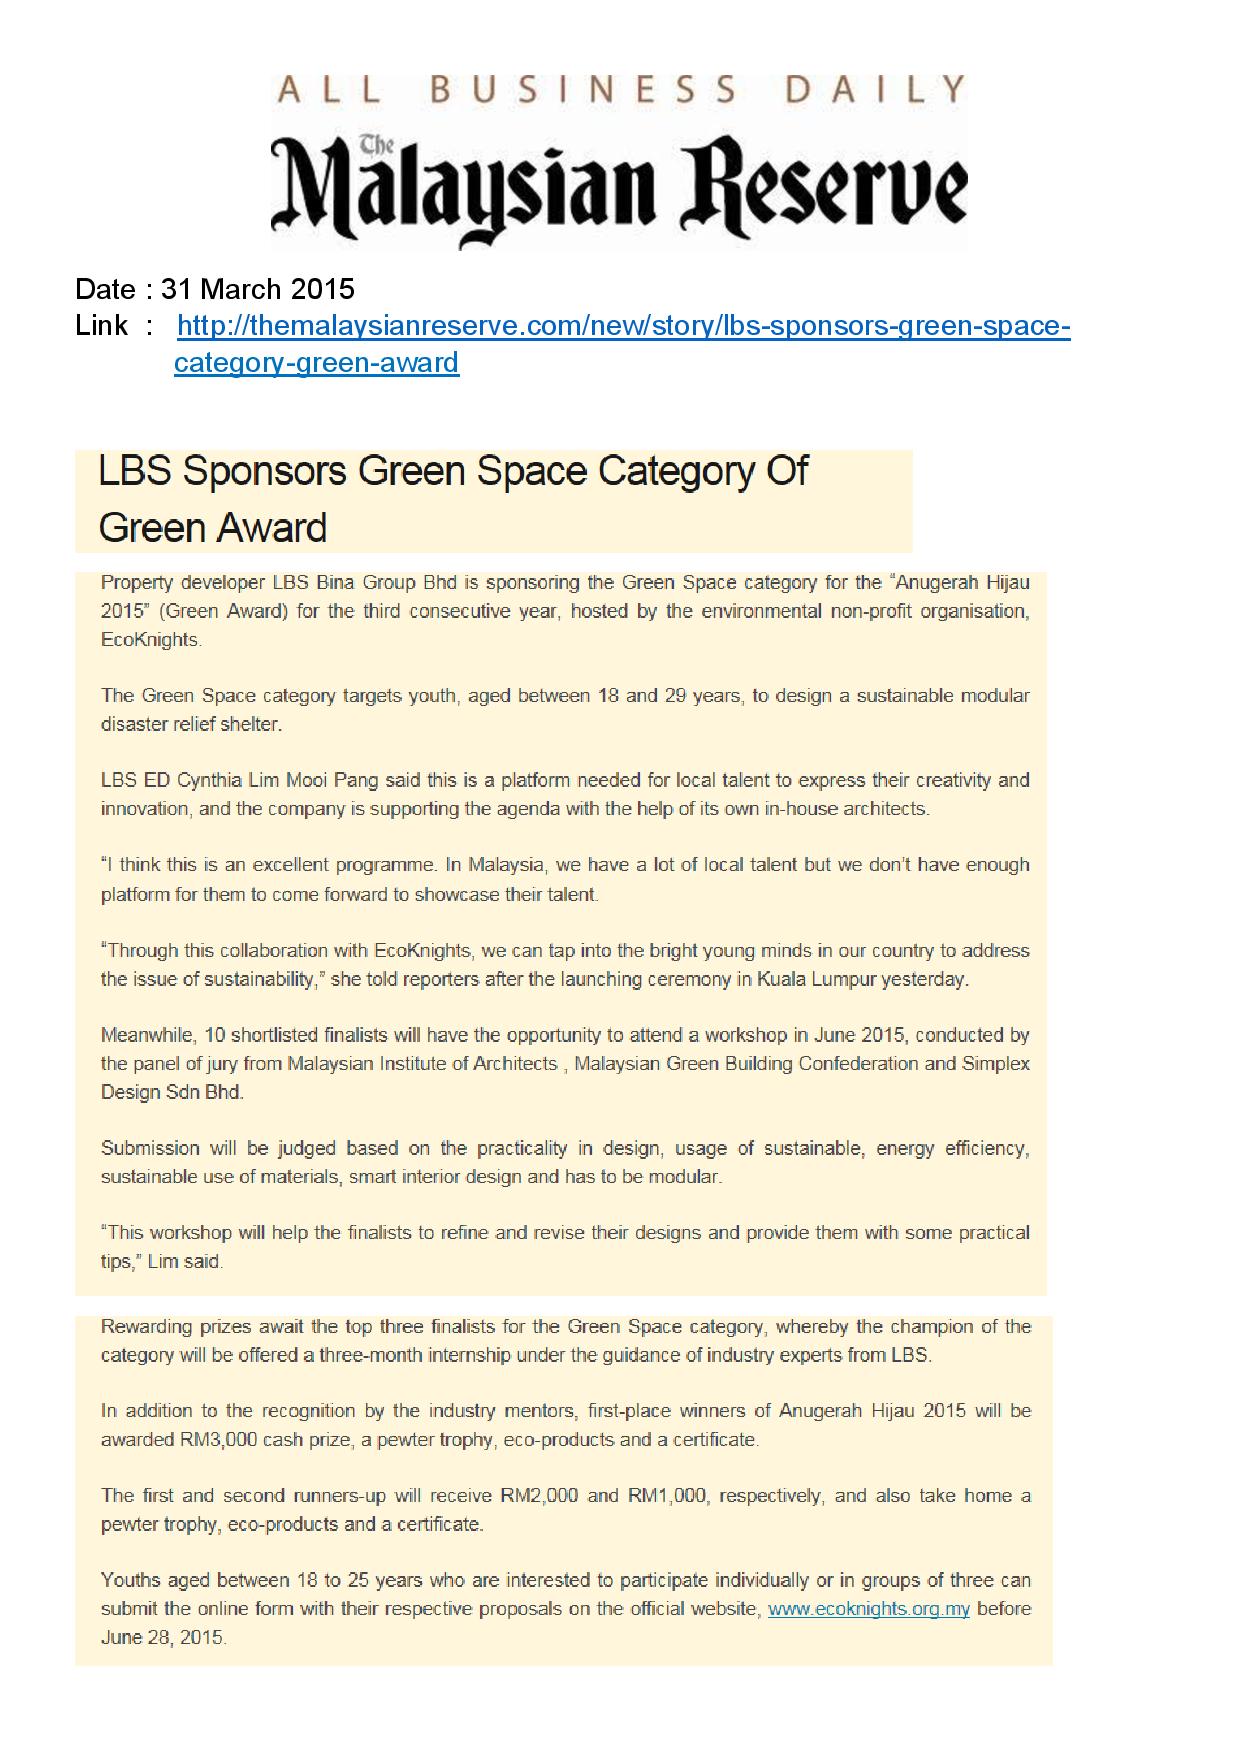 2015.03.31 Malaysian Reserve Online – LBS Sponsors Green Space Category of Green Award